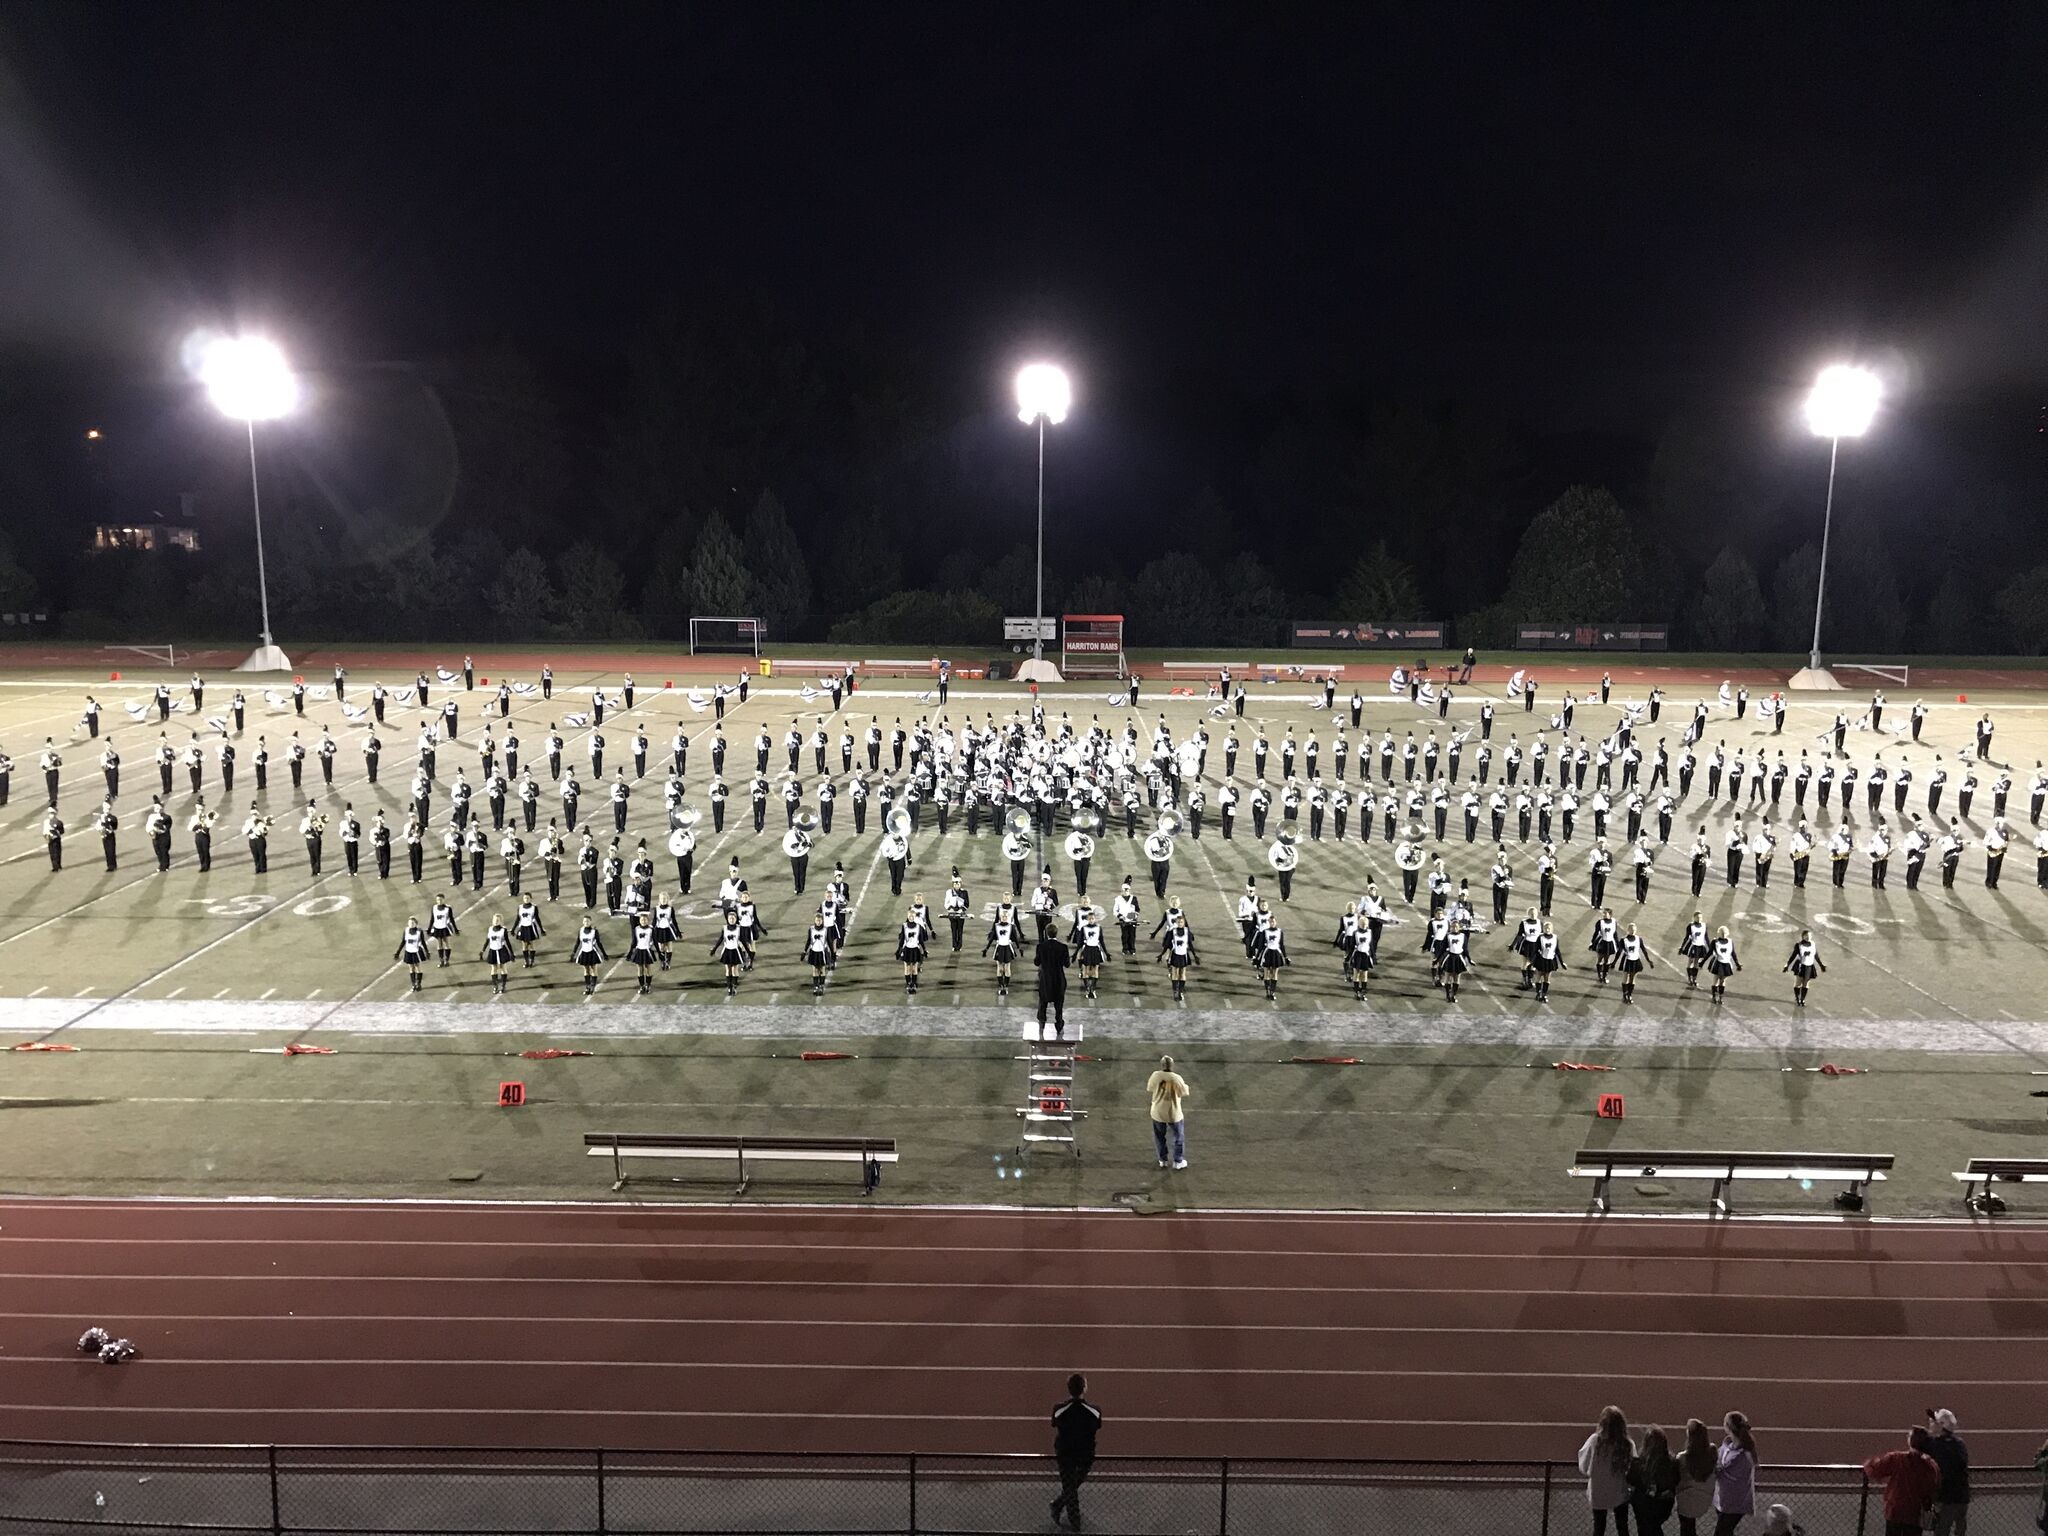 2048x1536 (Panther Marching Band - Strath Haven High School)